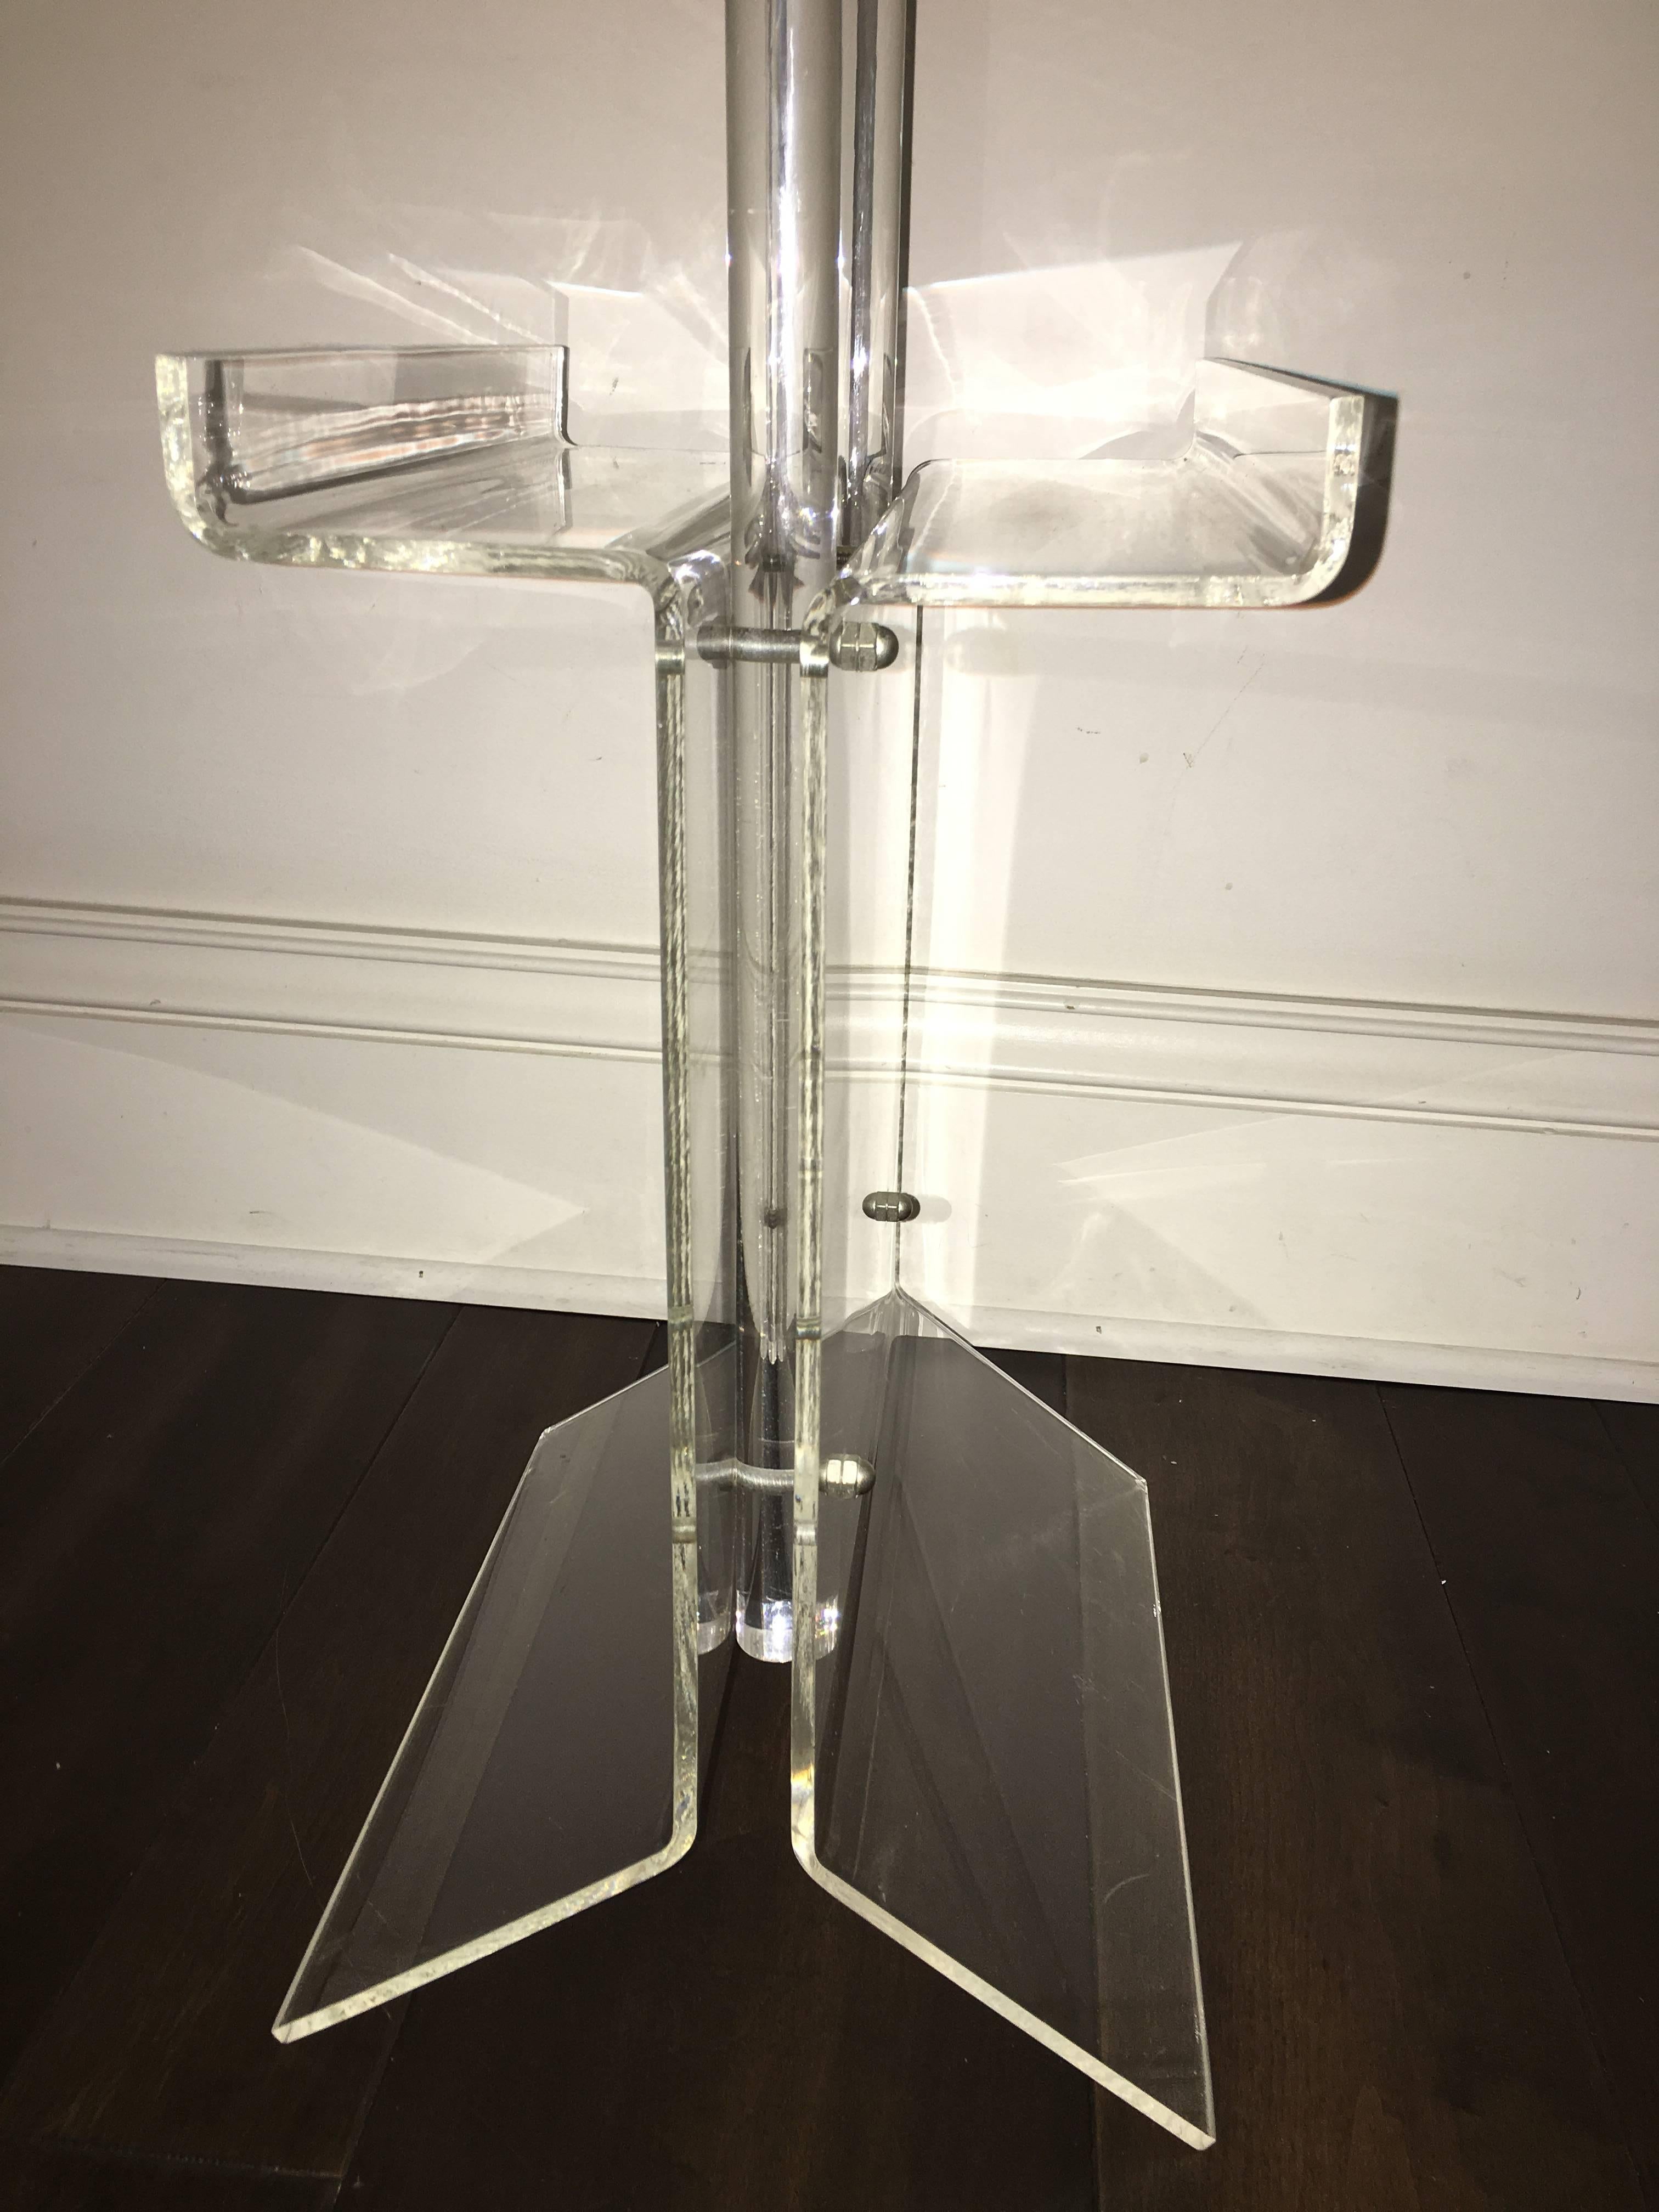 Late 20th Century Lucite Book Caddy Magazine Floor Rack Neal Small Style